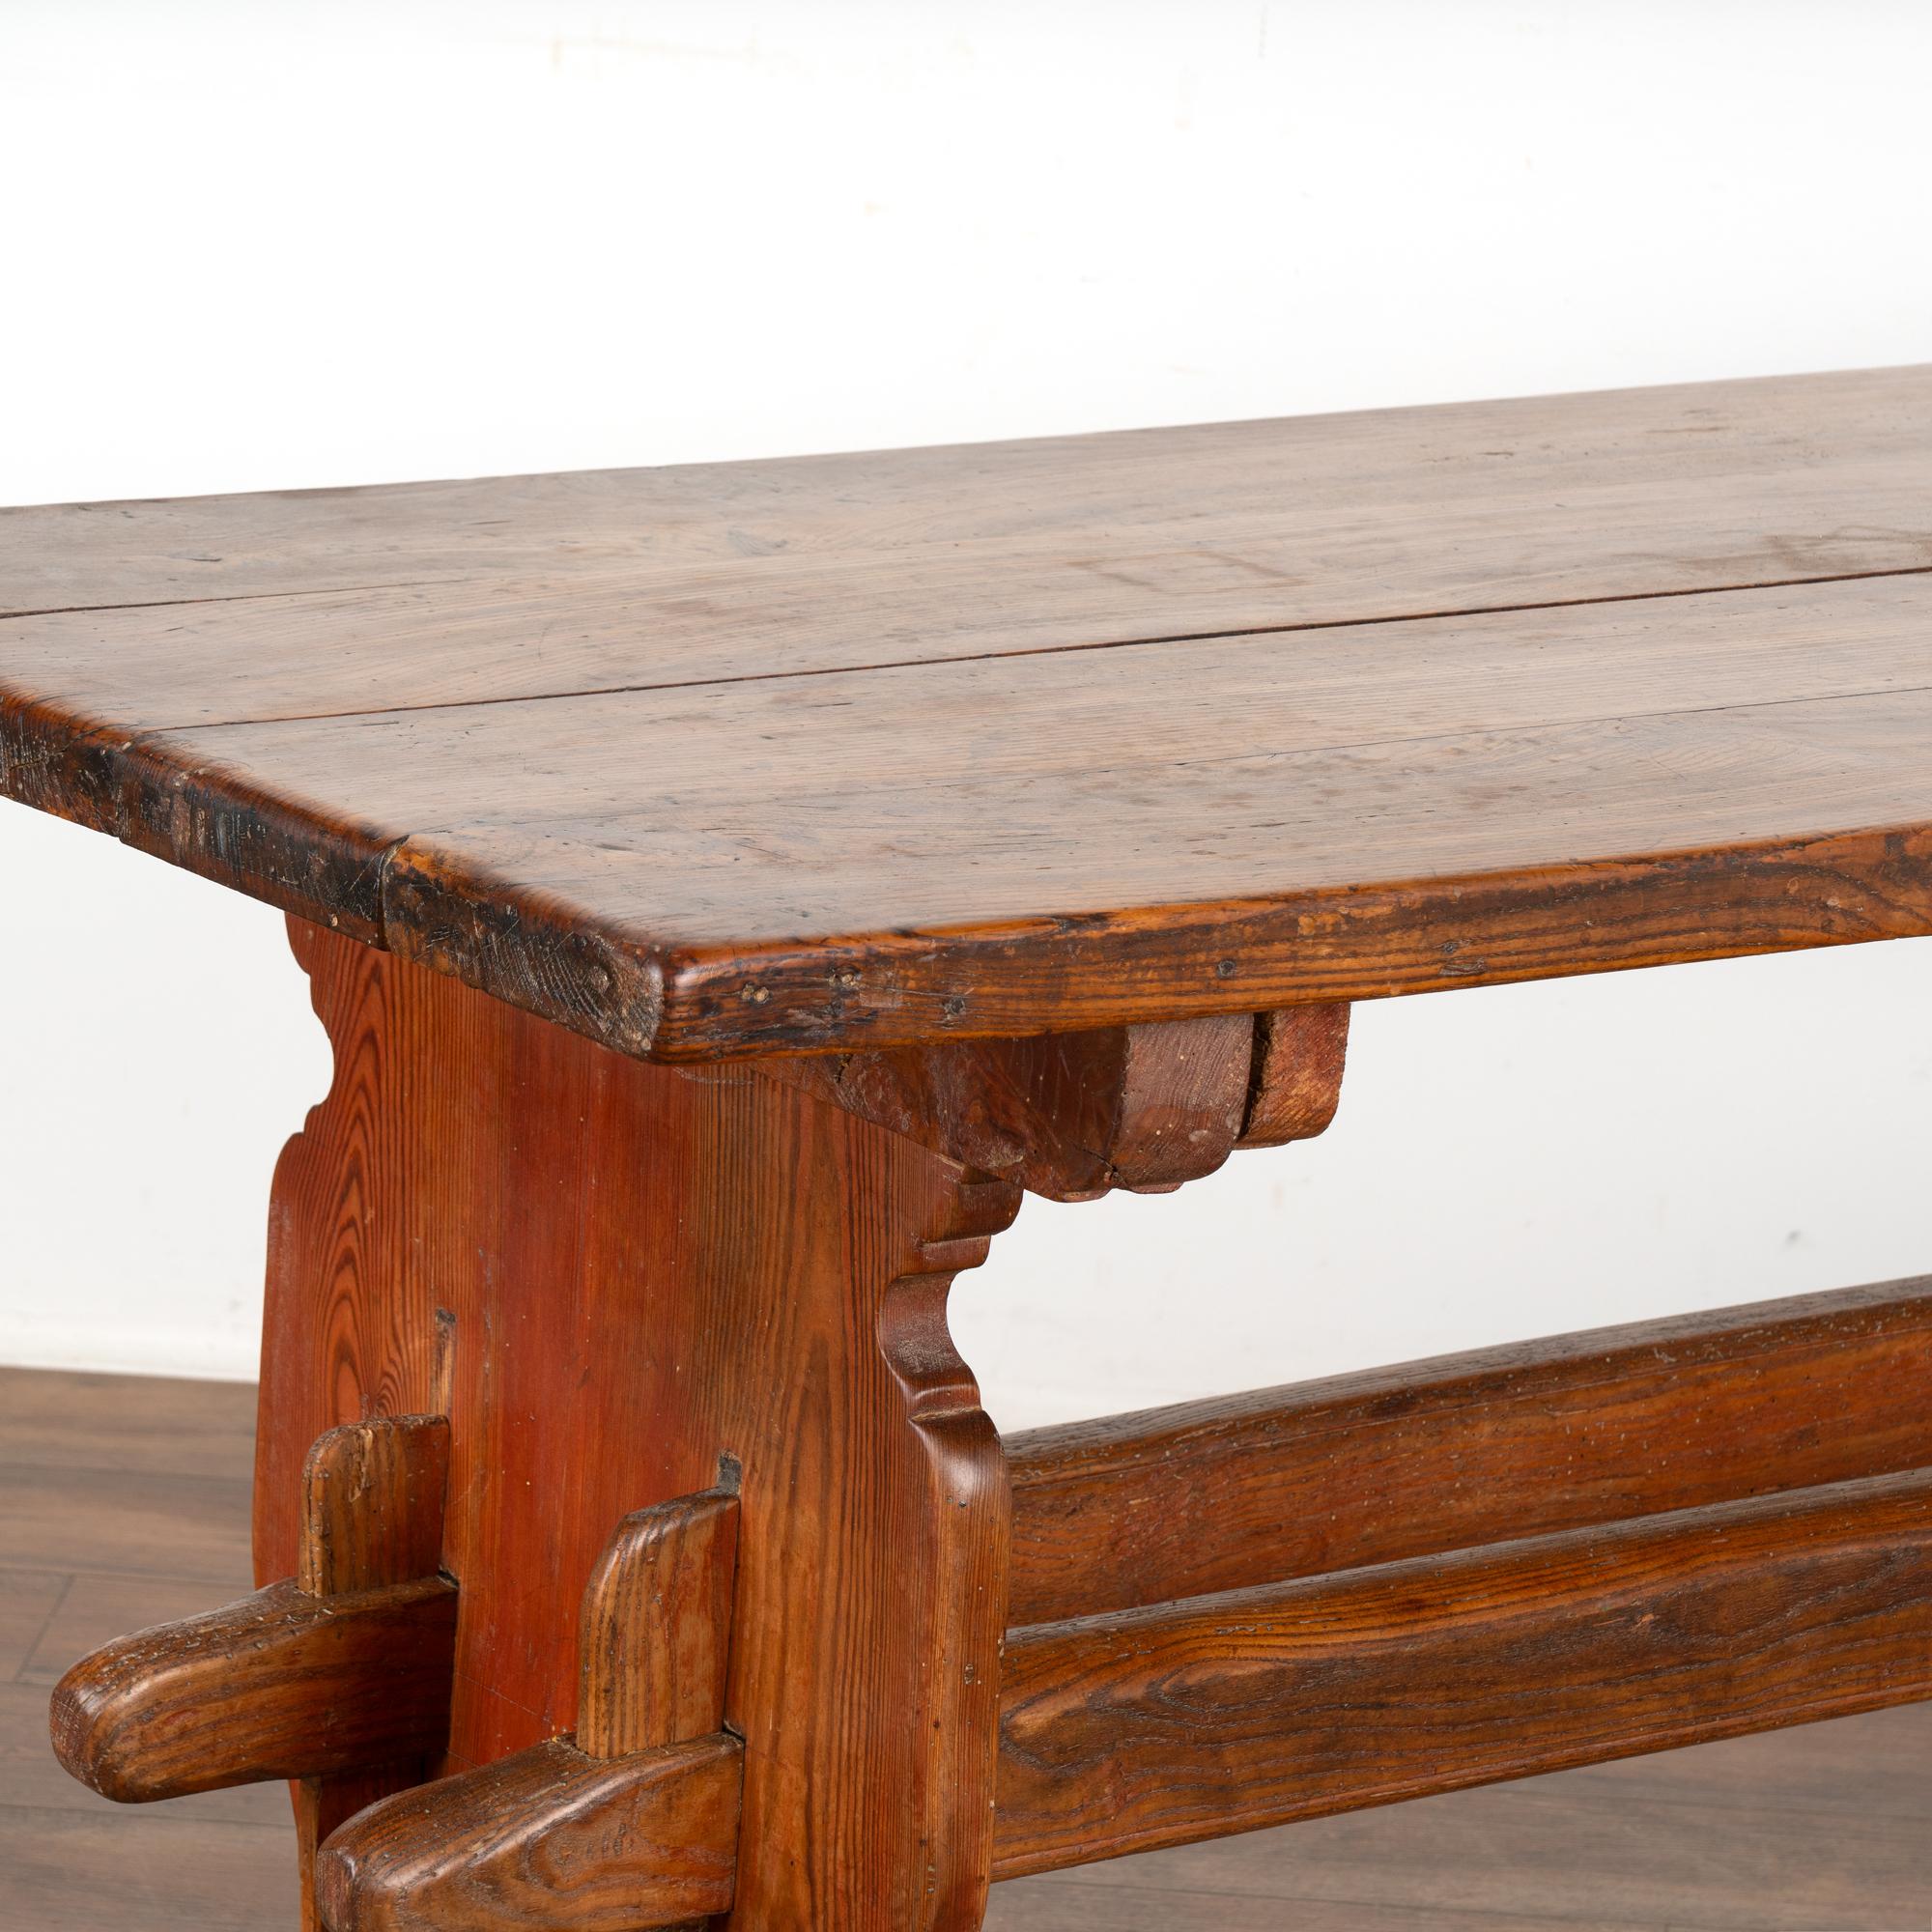 Wood Farm Dining Kitchen Table With Trestle Base, Denmark circa 1820-40 For Sale